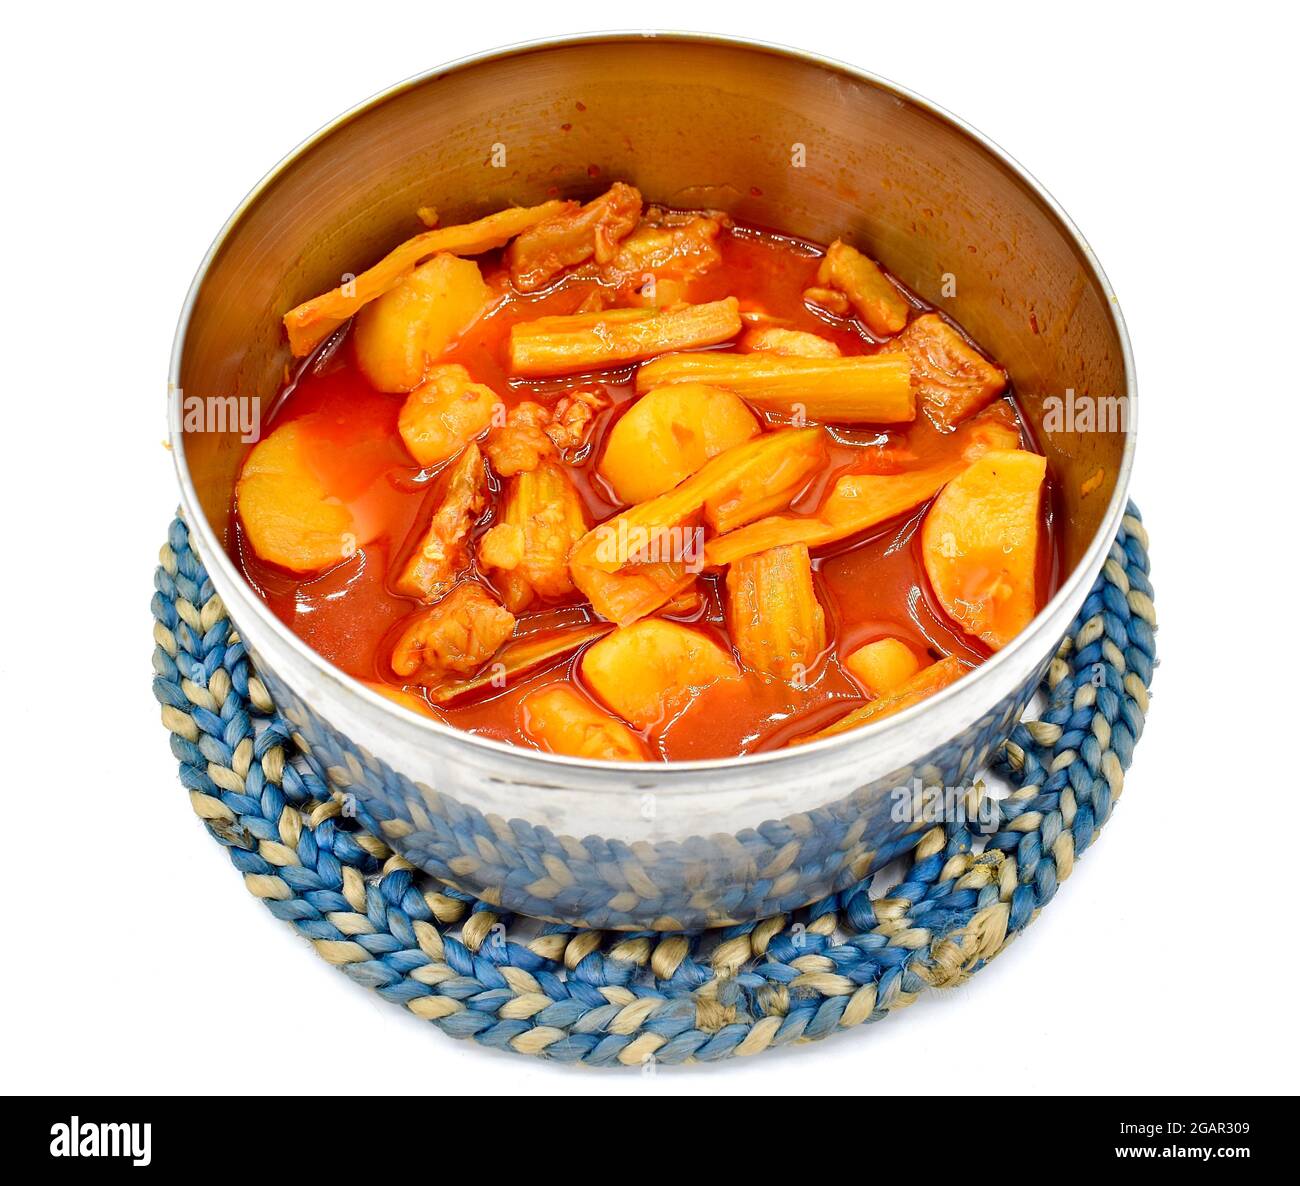 Southeast Asian, Myanmar or Indian traditional chopped drumsticks, dried fishes and potatoes curry with oil in steel dish. Stock Photo